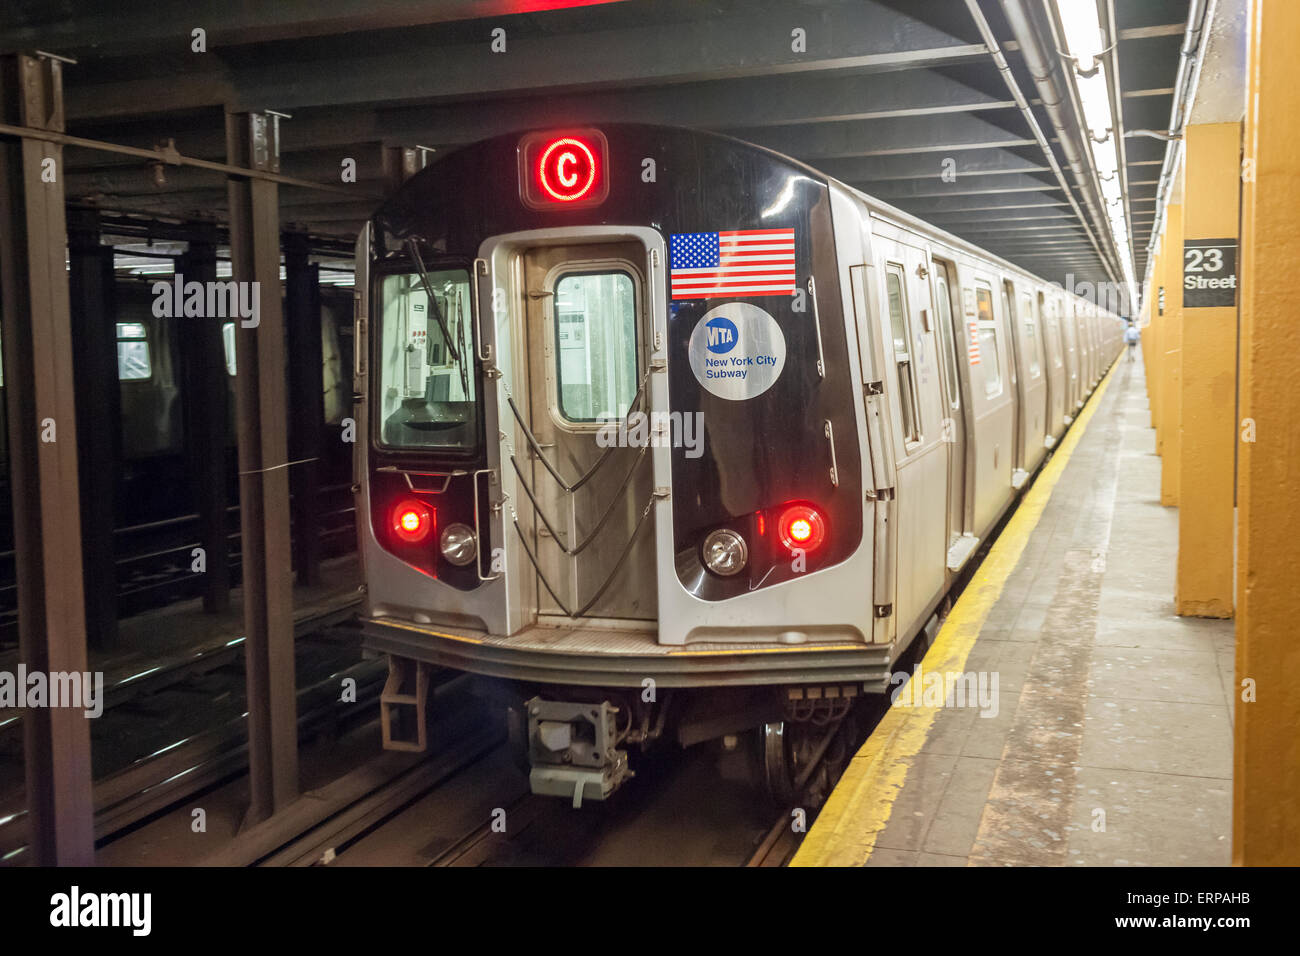 A spanking brand new R132 subway car departs the West 23rd Street station on the C line in New York on Friday, June 5, 2015. The new cars are replacing the 40 year old R32 cars whose air conditioning cannot keep up with hot air from trains' ventilation.  The older cars are the oldest rolling stock in the system. (© Richard B. Levine) Stock Photo